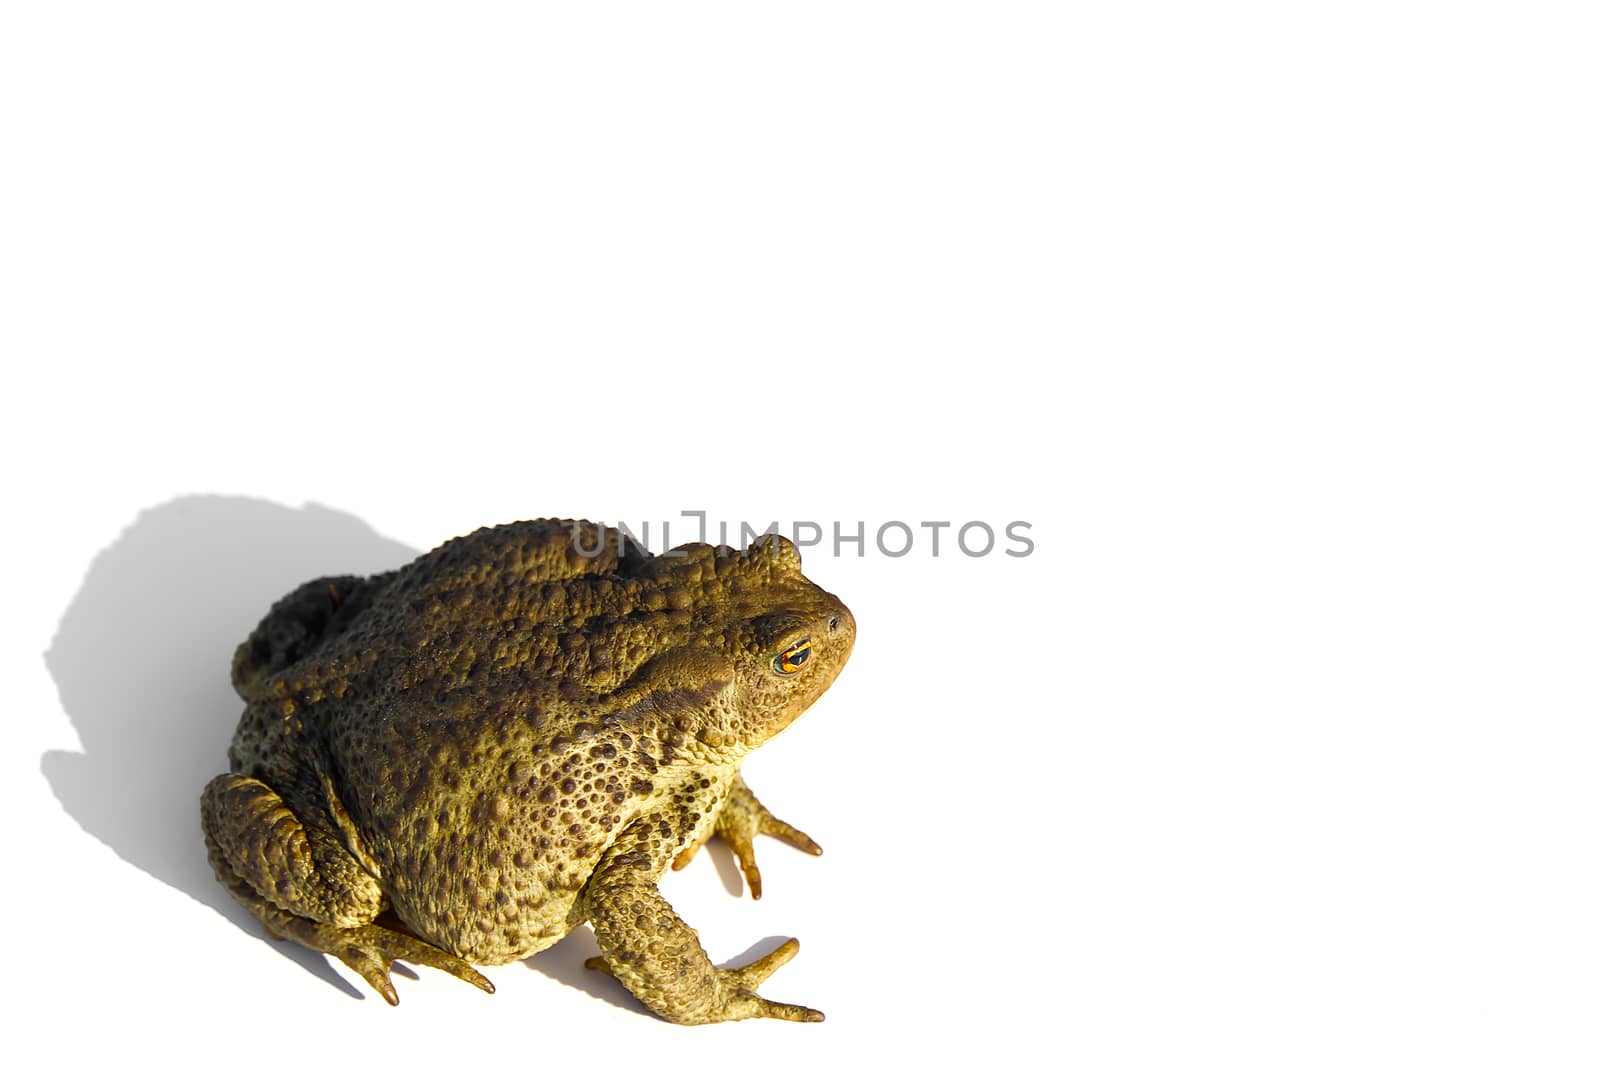 Common toad or European toad, Bufo bufo, isolated on white background. by PhotoTime